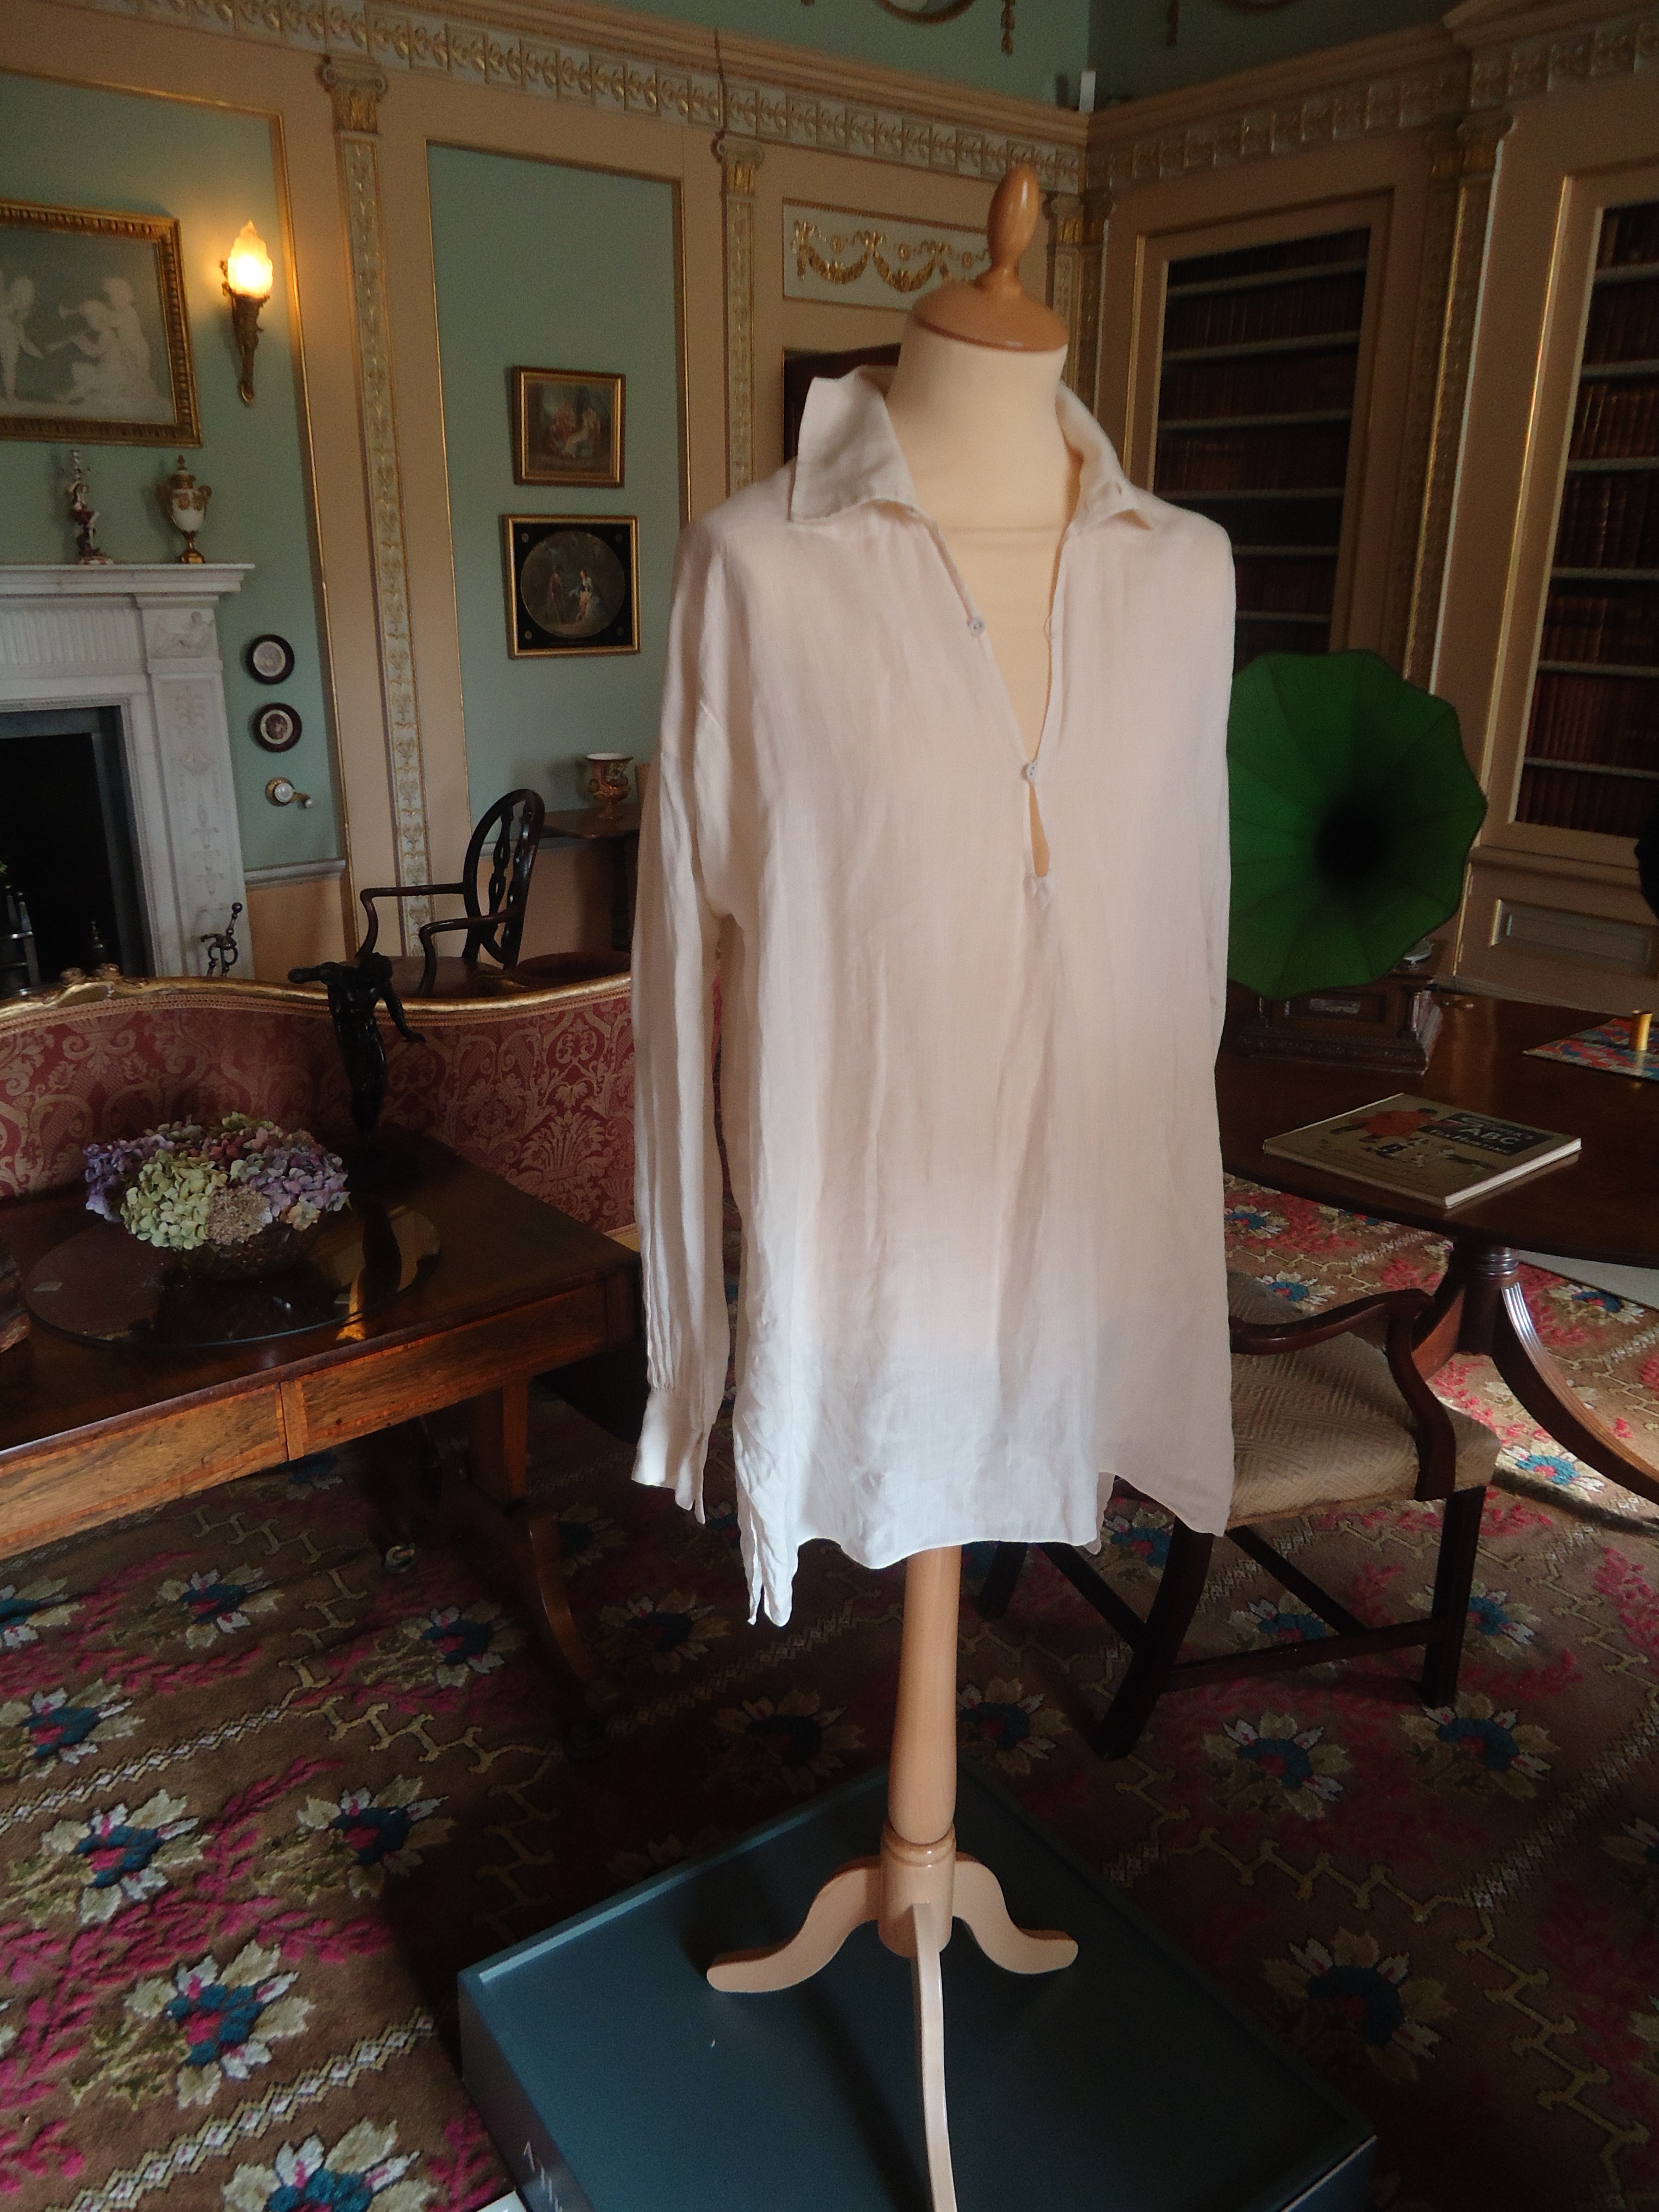 Mr Darcy's shirt - HandBound Costumes personal Research,Berrington Hall - HandBound Costume Research, Tv and Period Drama costumes, BBC Pride and Prejudice Costumes - Mr Darcy, Theatrical ~Period Costume. made to measure period clothing and costume, bespoke historical costumes